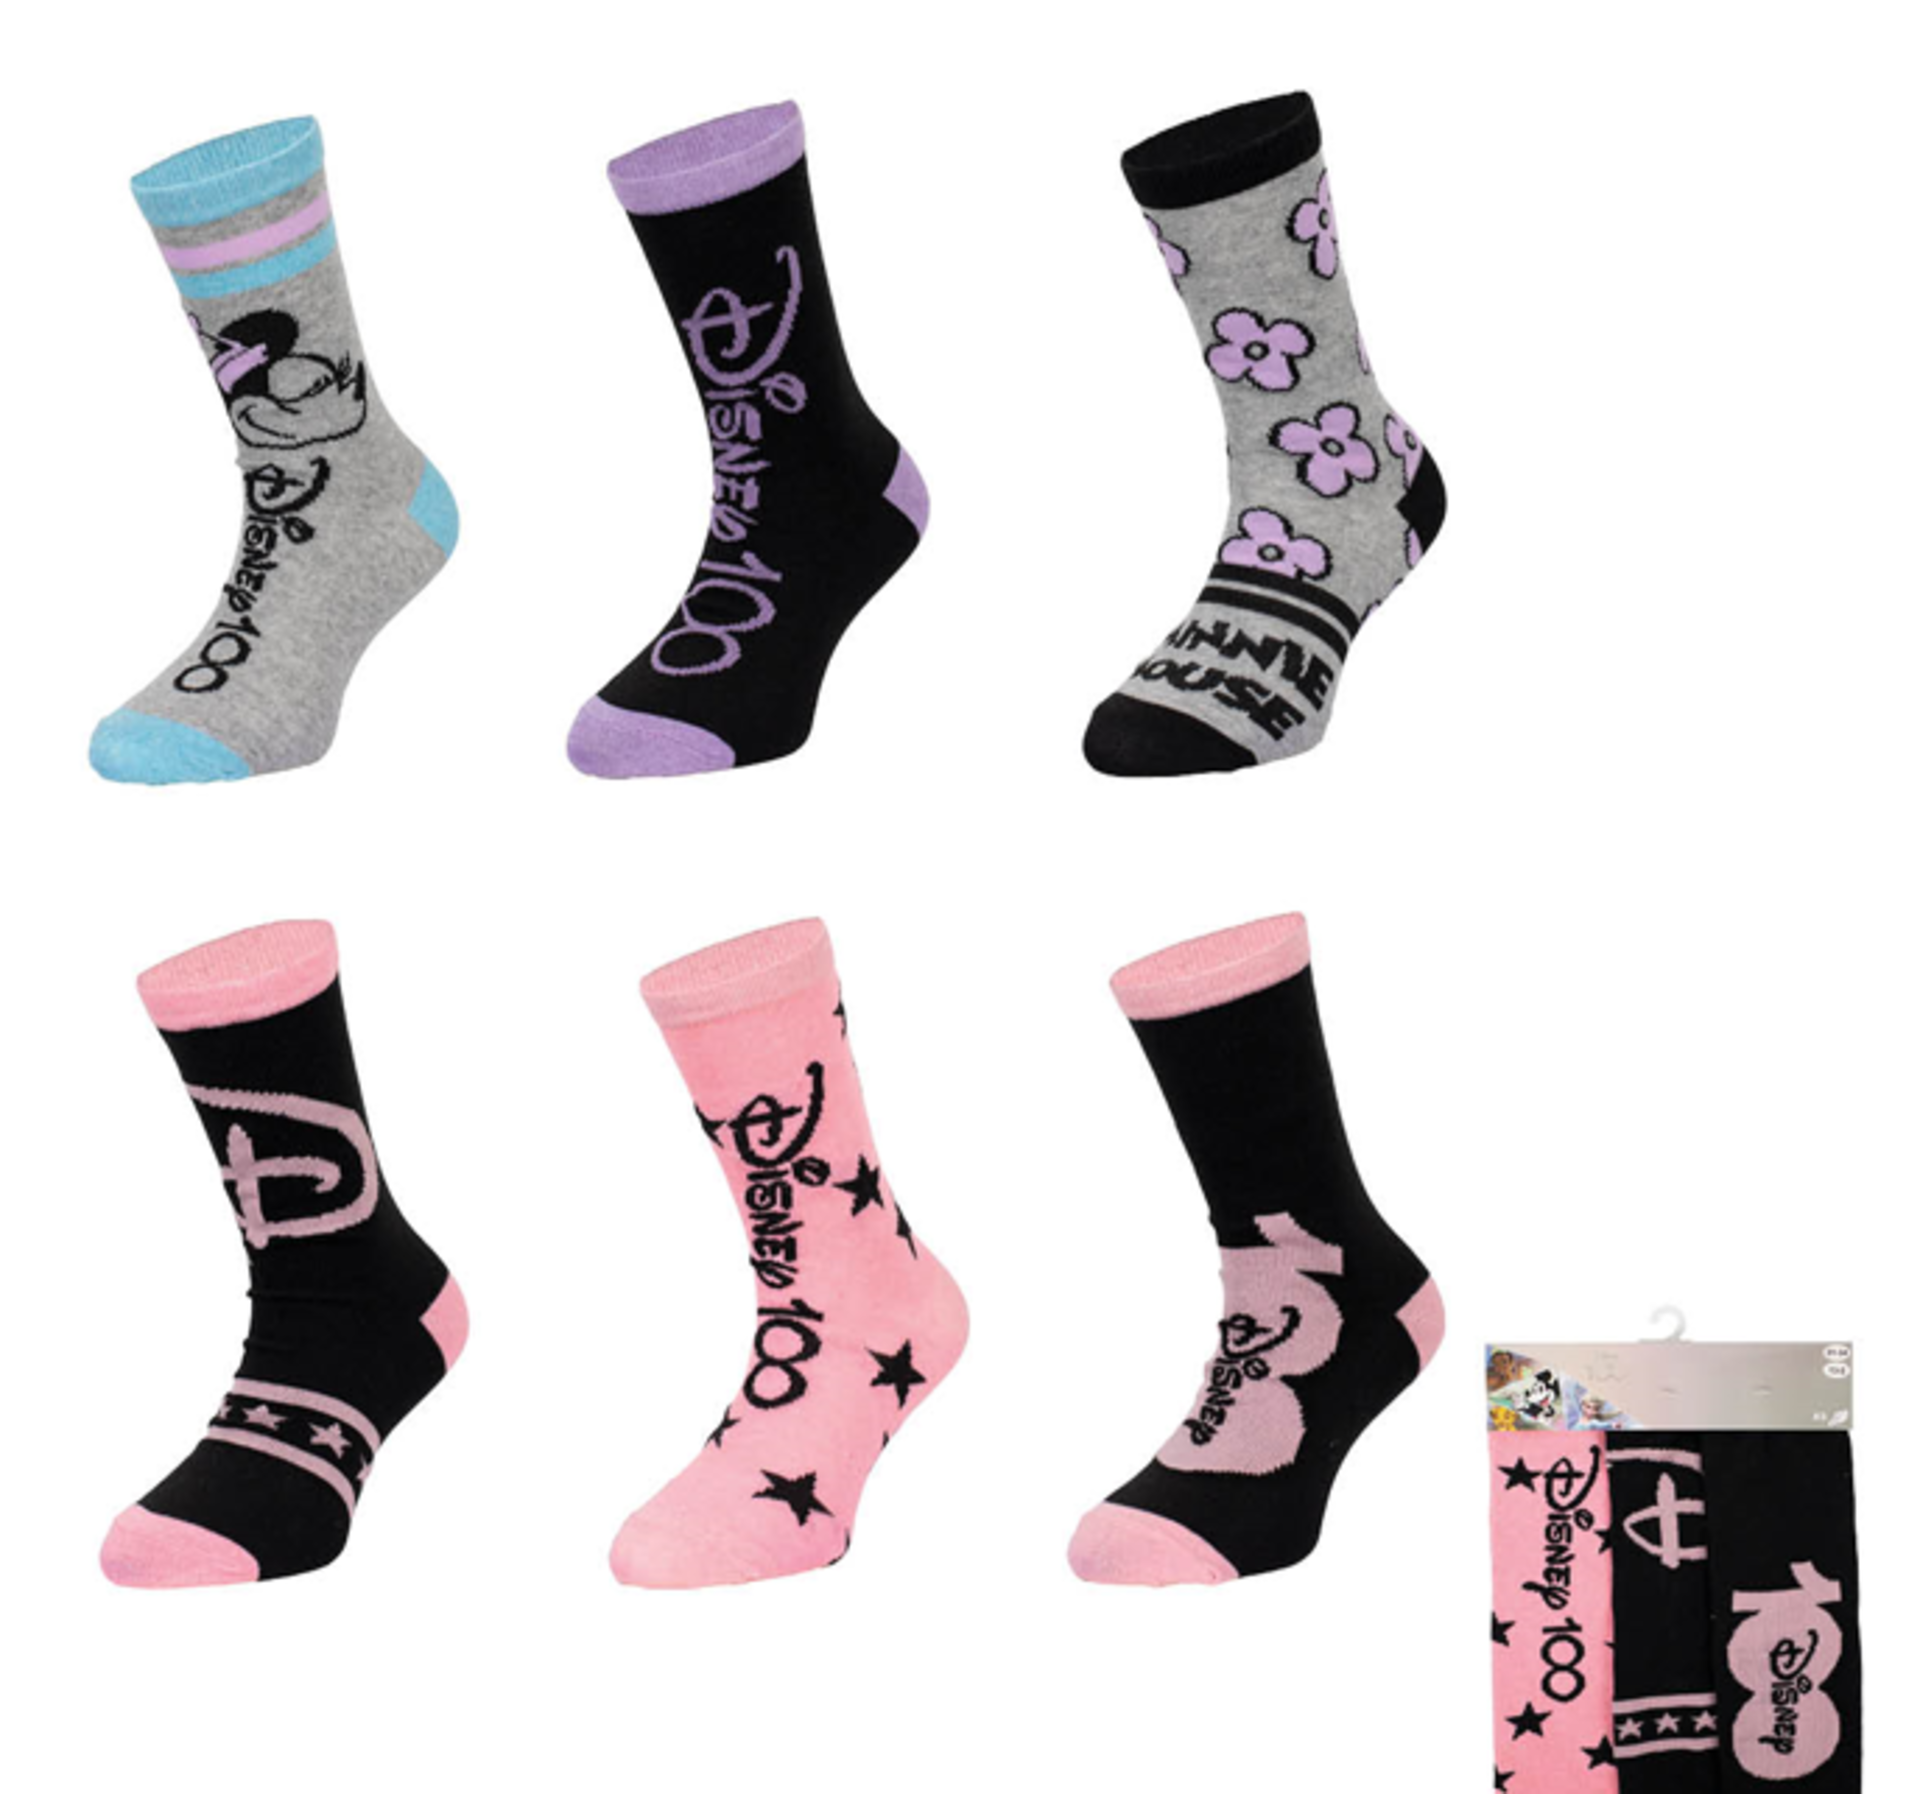 56 x New & Packaged Official Licenced Disney Minnie Mouse Pack of 3 Mixed Socks. Various sized and - Image 2 of 2